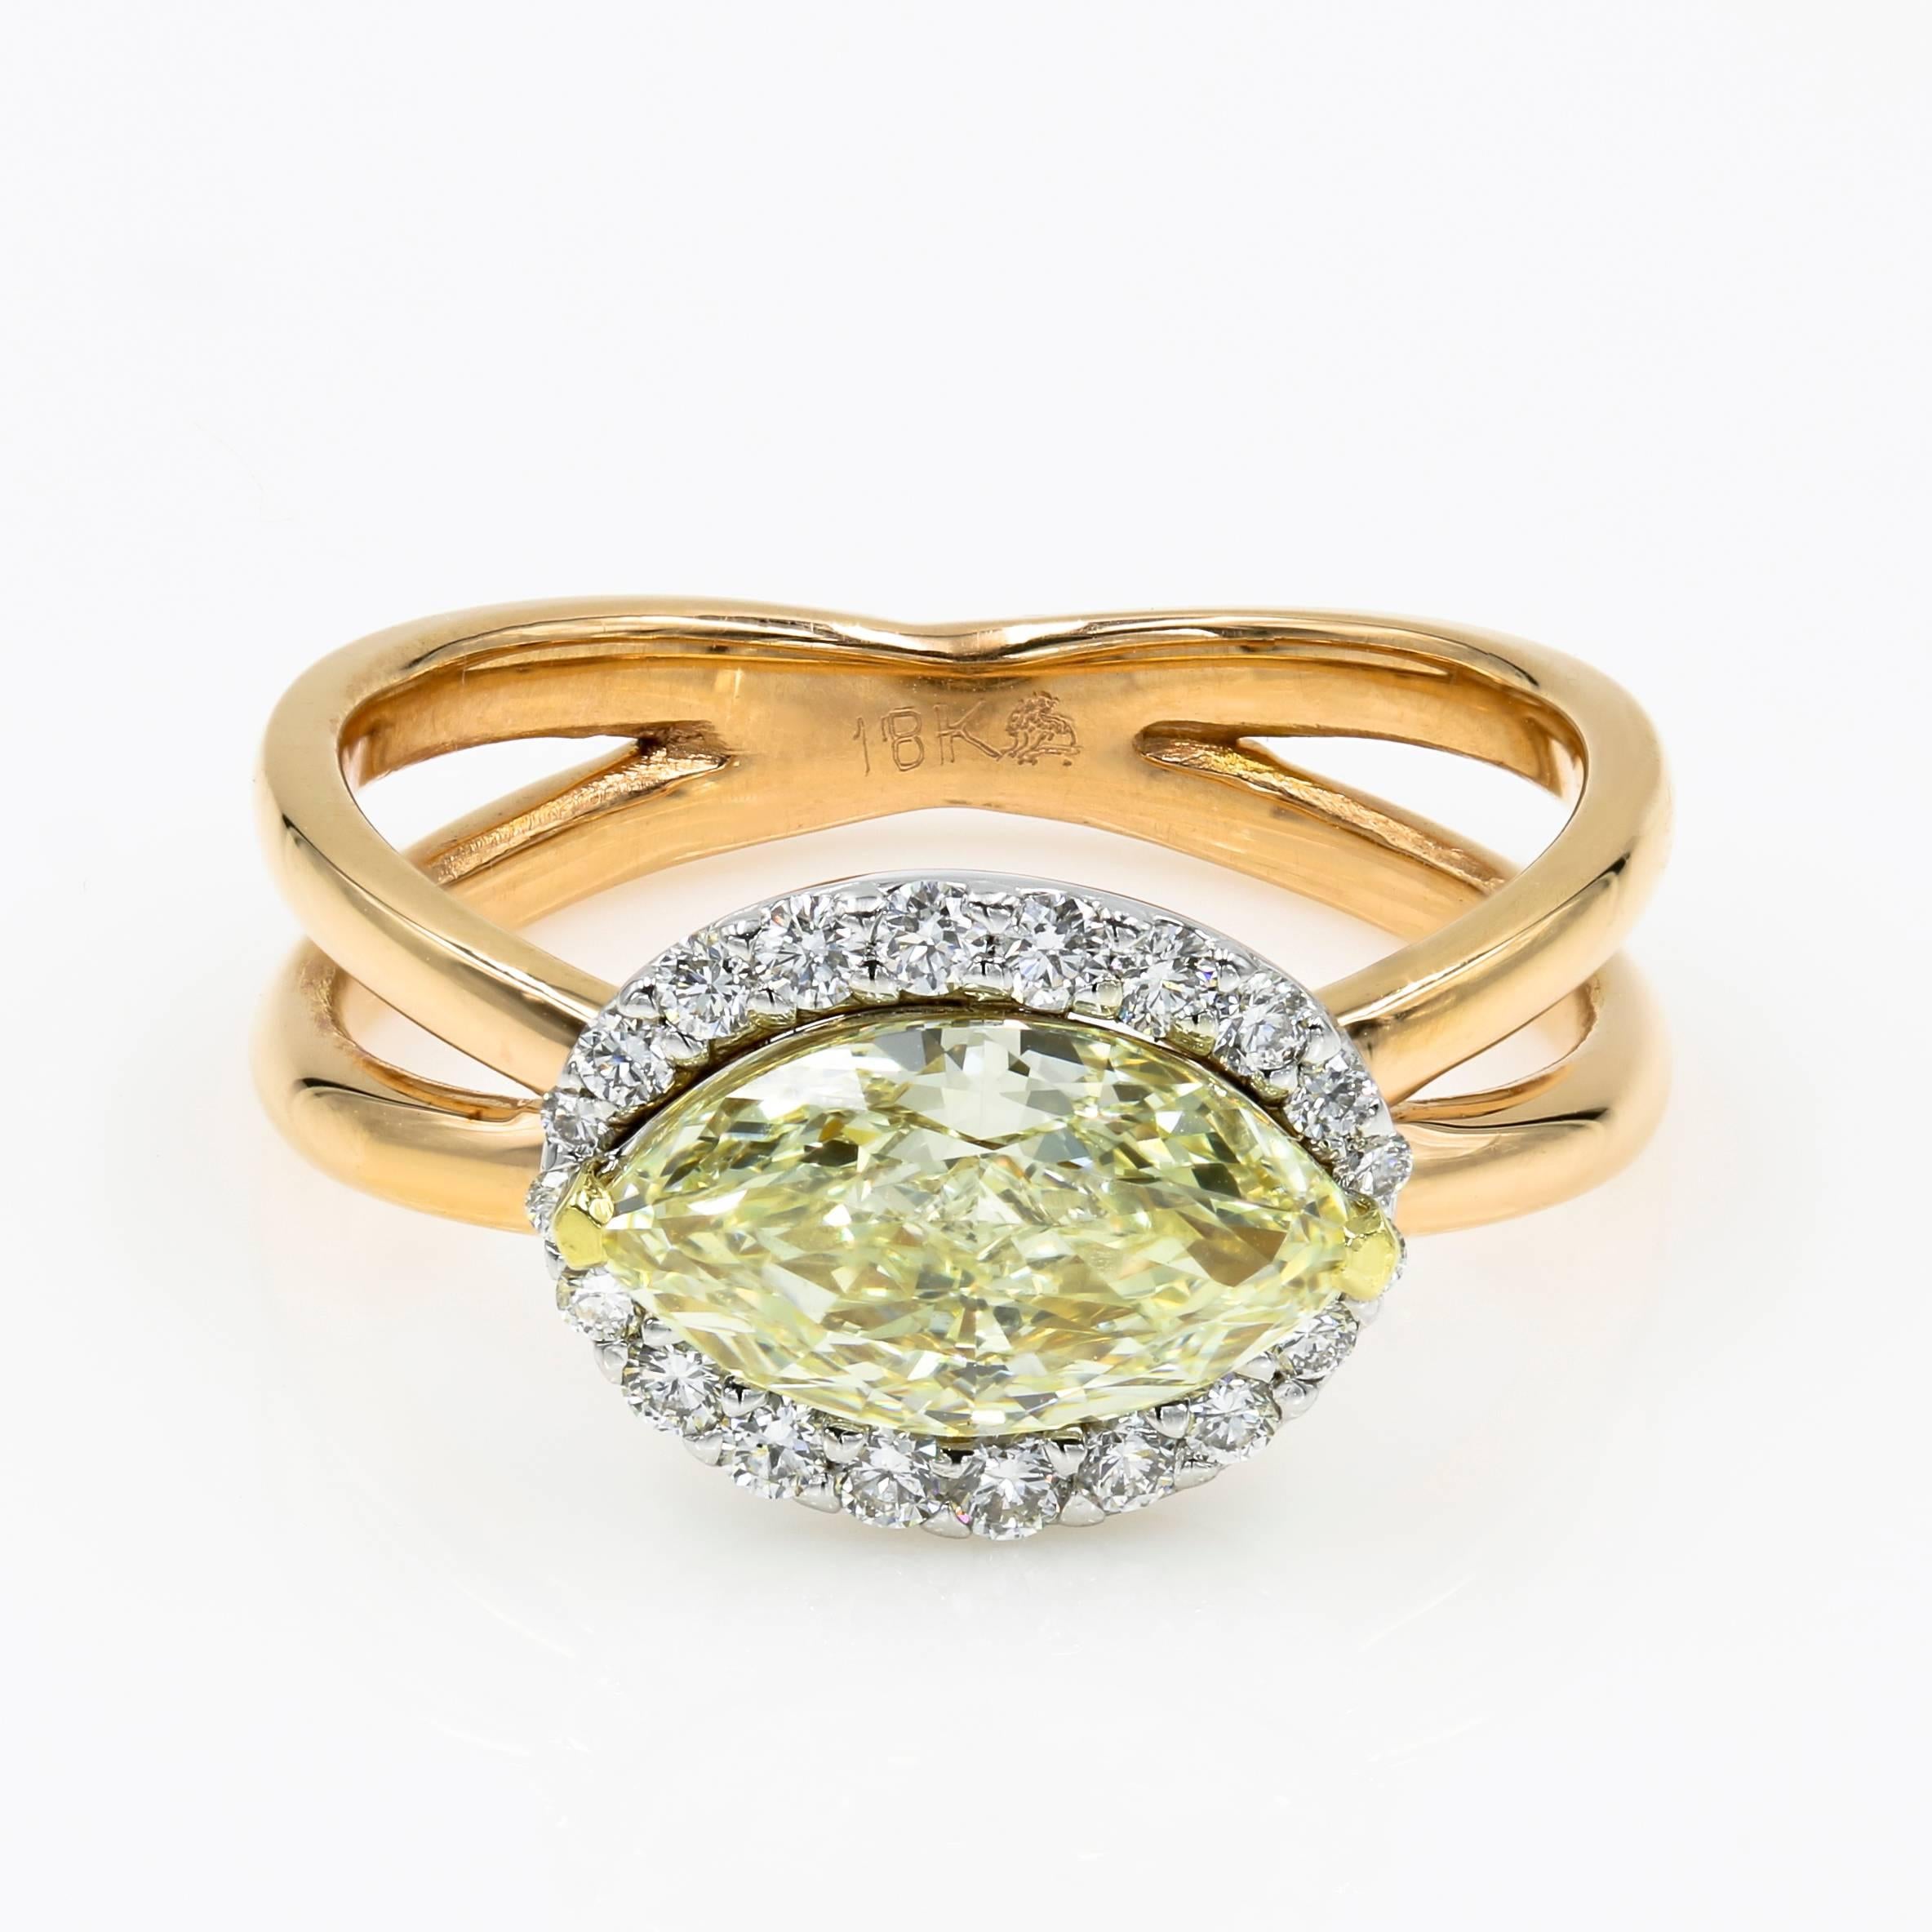 This stunning 1.50cts. marquise cut Chardonnay Diamond® ring  is W-X color and VS1 clarity. The diamond has a unique serial number on the girdle along with the Chardonnay Diamond® Logo. It is set in 18kt. yellow, rose & white gold with 20 ideal cut